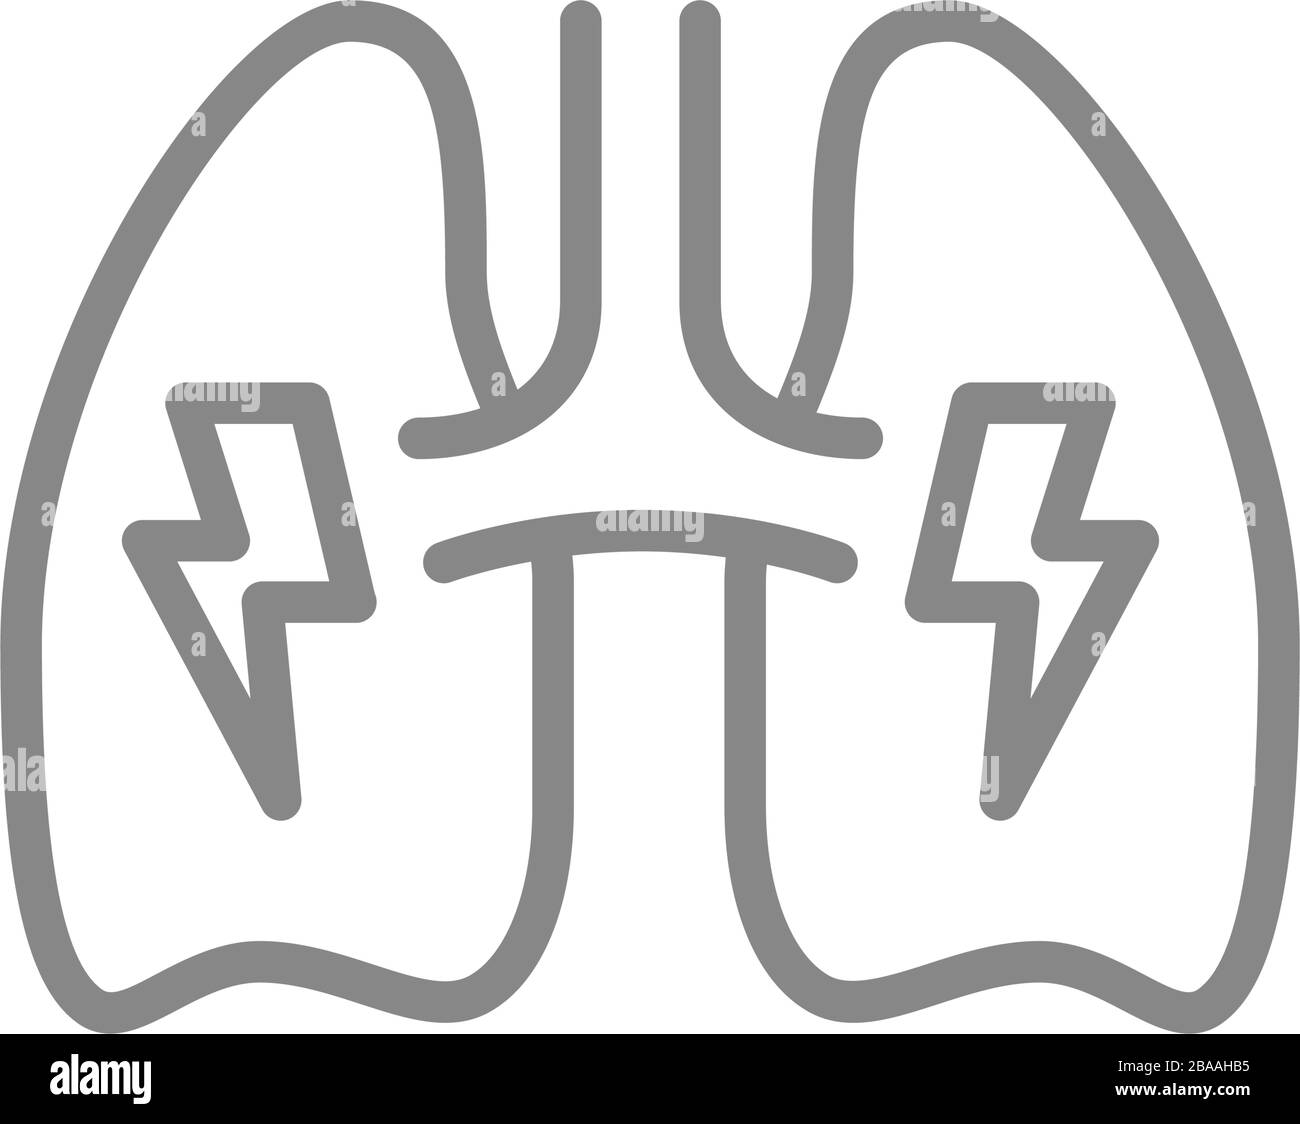 Lungs with acute pain line icon. Danger of lung disease symbol Stock Vector